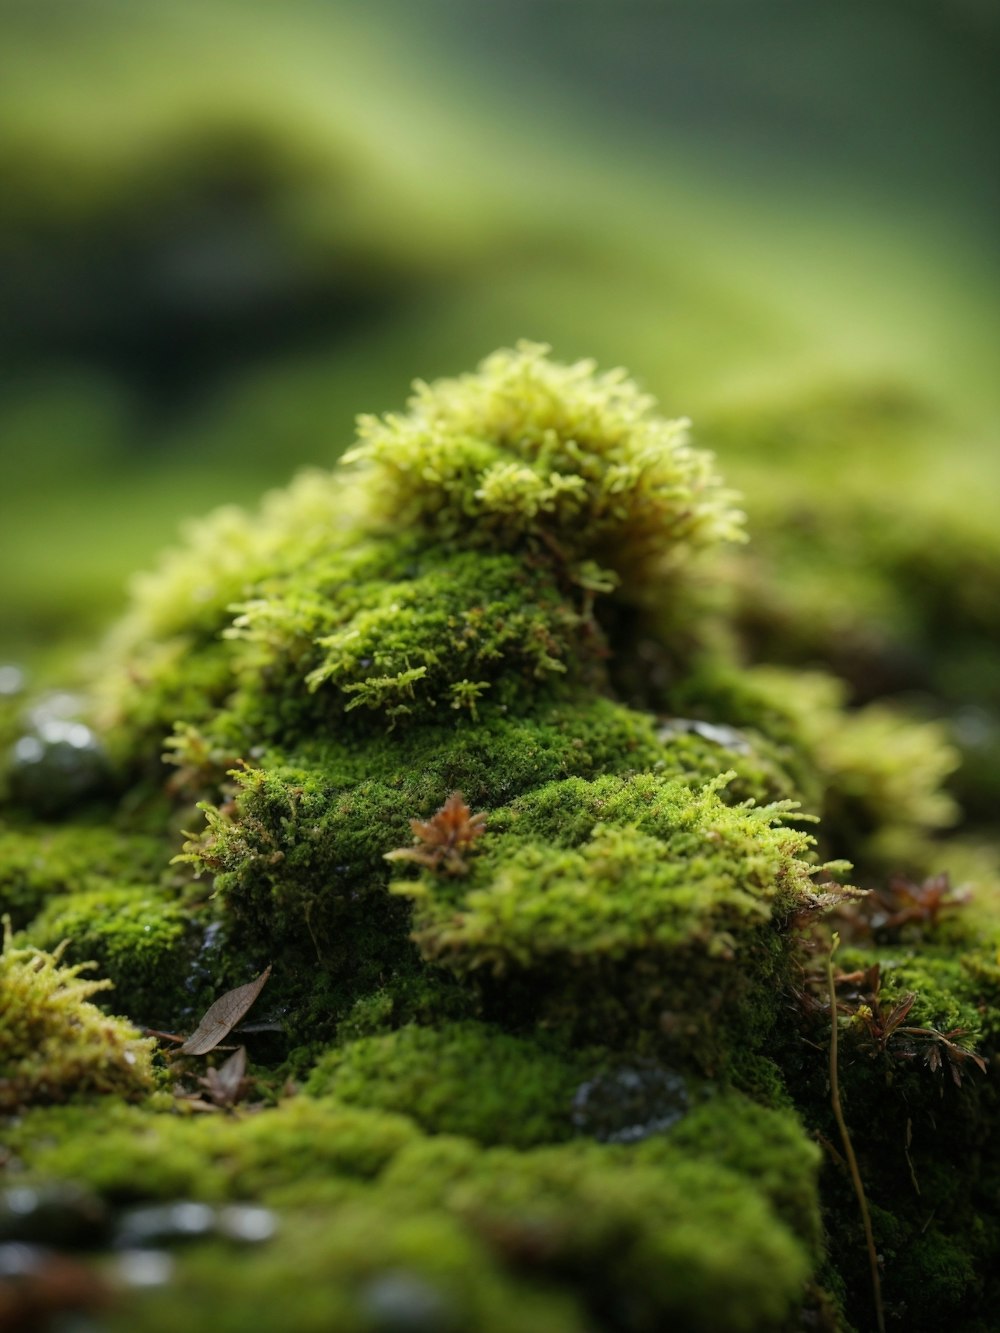 a close up of a mossy surface with drops of water